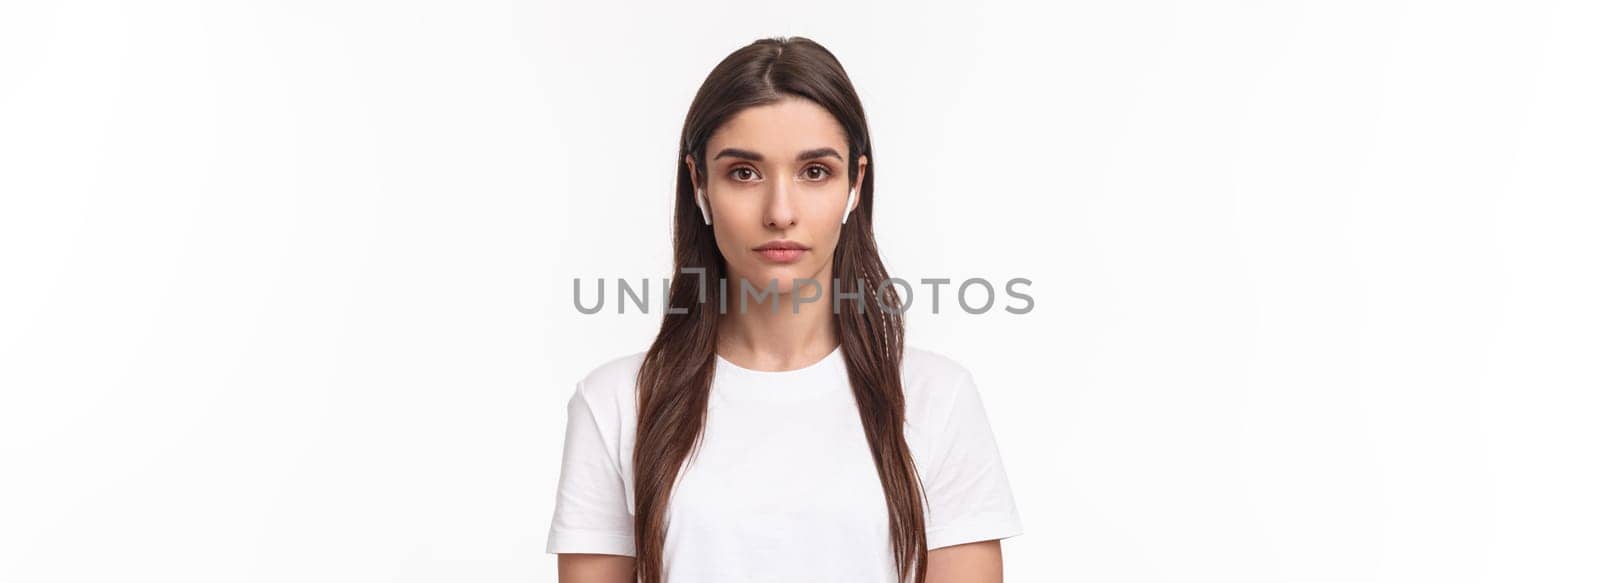 Close-up portrait of serious-looking attractive caucasian woman in wireless earphones, looking at camera with relaxed no emotions face, standing white background. Copy space